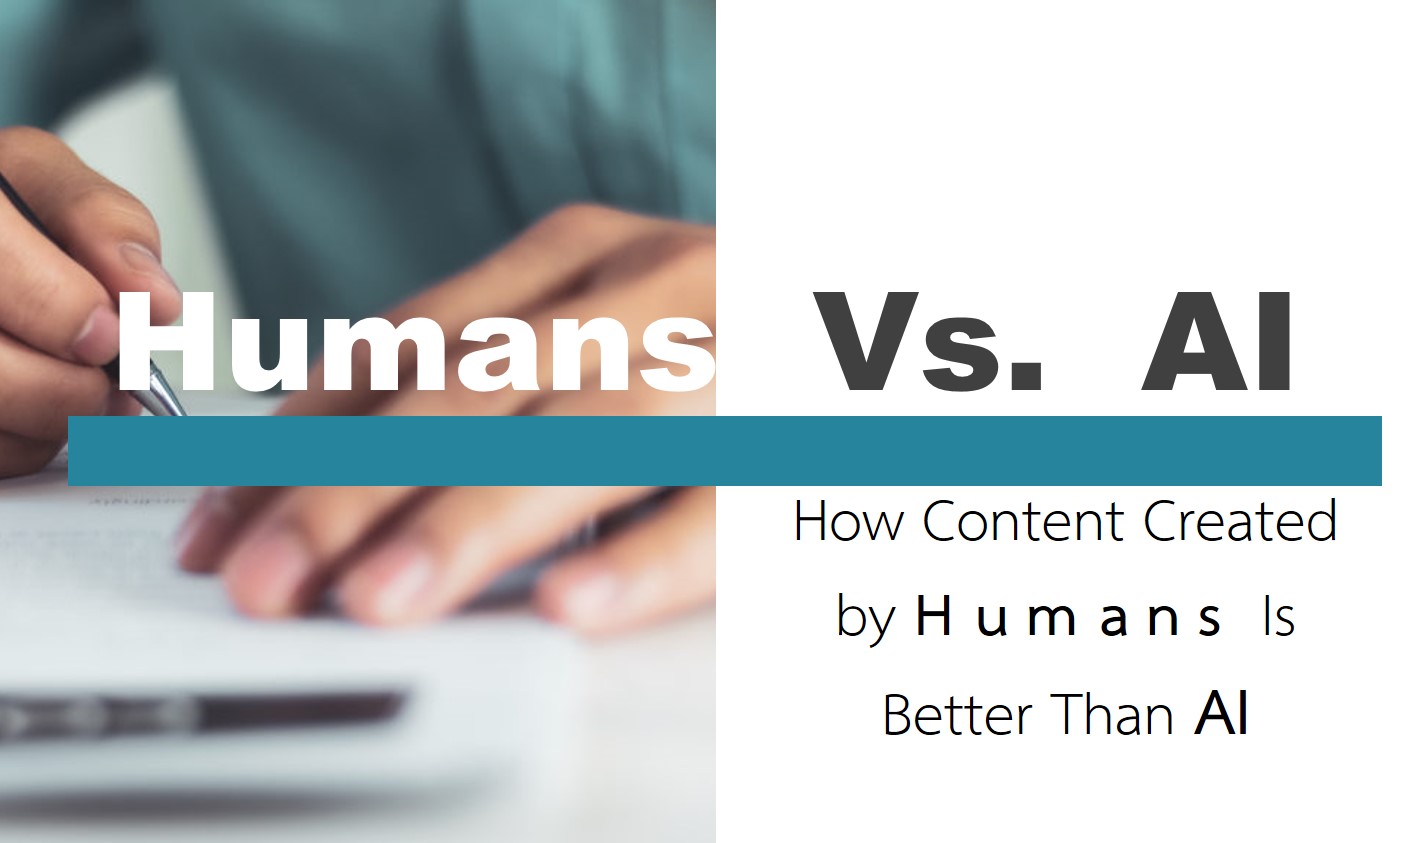 <p>Discover why content created by humans is superior to AI-generated content. Explore the emotional depth, authenticity, and creativity unique to human creators.</p>
<p>Human-created content, AI-created content, HumansVsAI</p>
